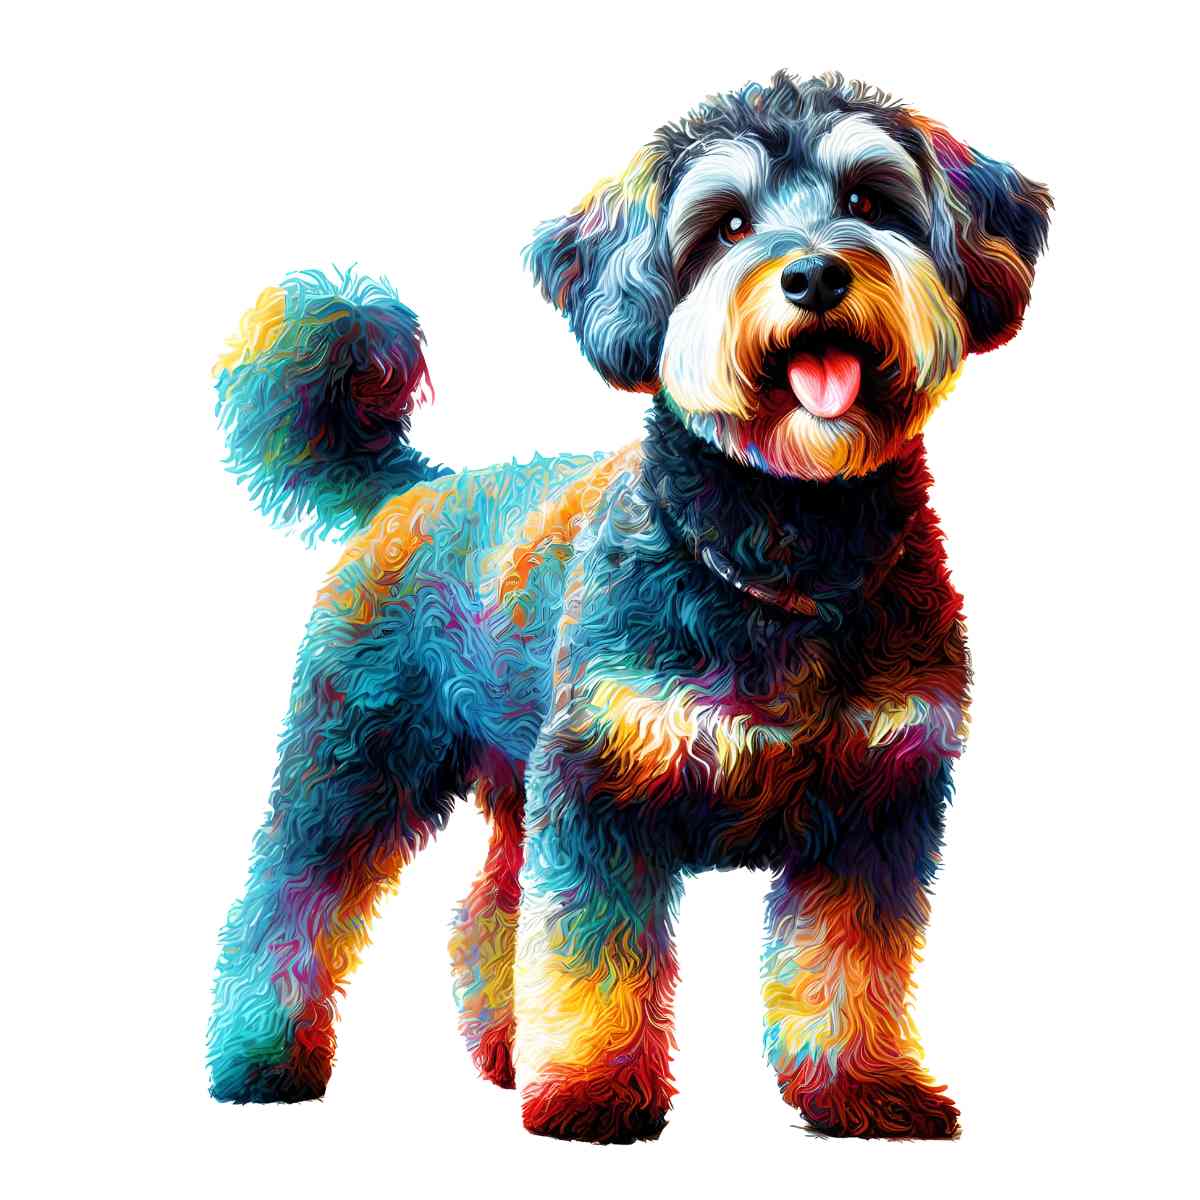 Animal Jigsaw Puzzle > Wooden Jigsaw Puzzle > Jigsaw Puzzle A4 Schnoodle Dog - Jigsaw Puzzle